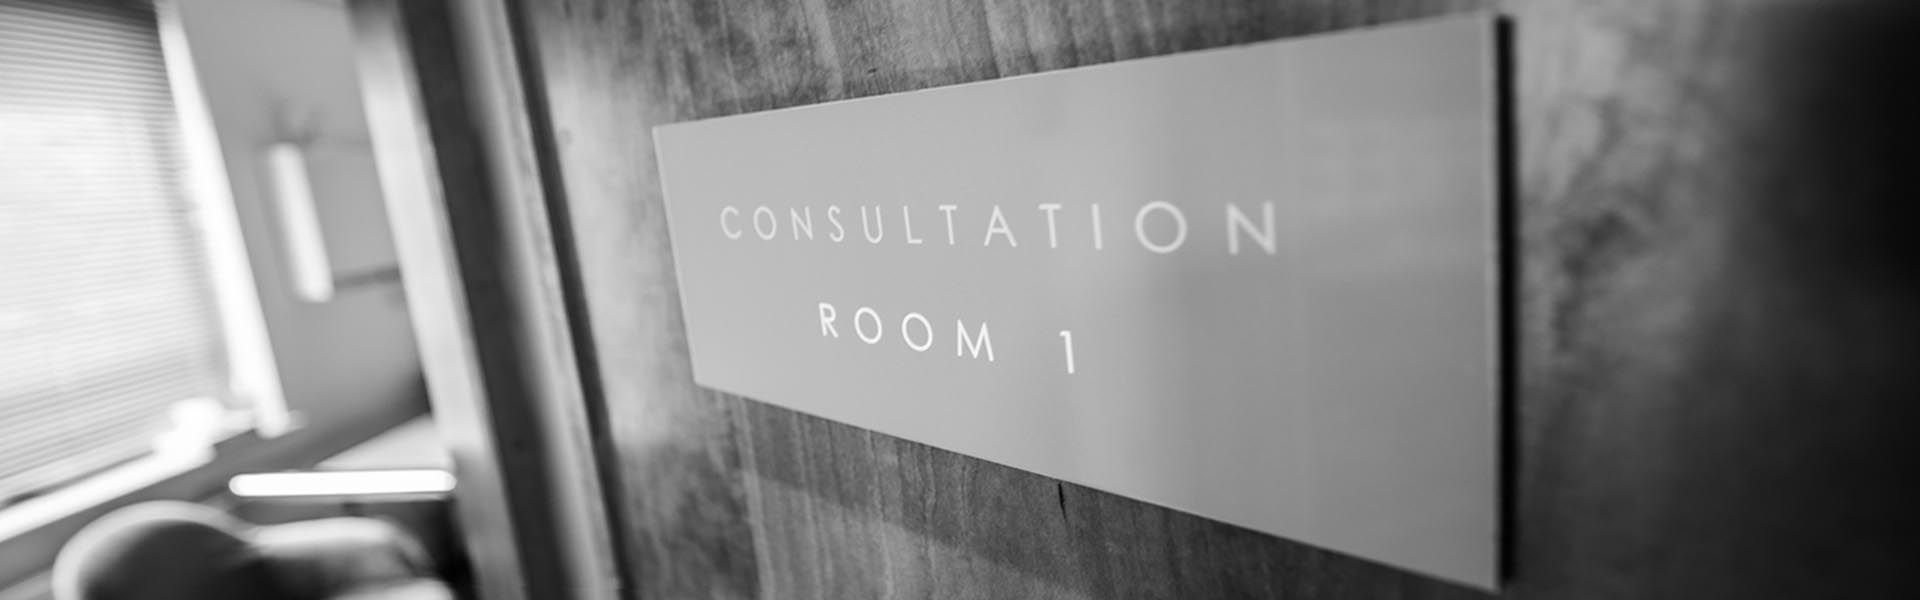 a sign that says consultation room 1 on it